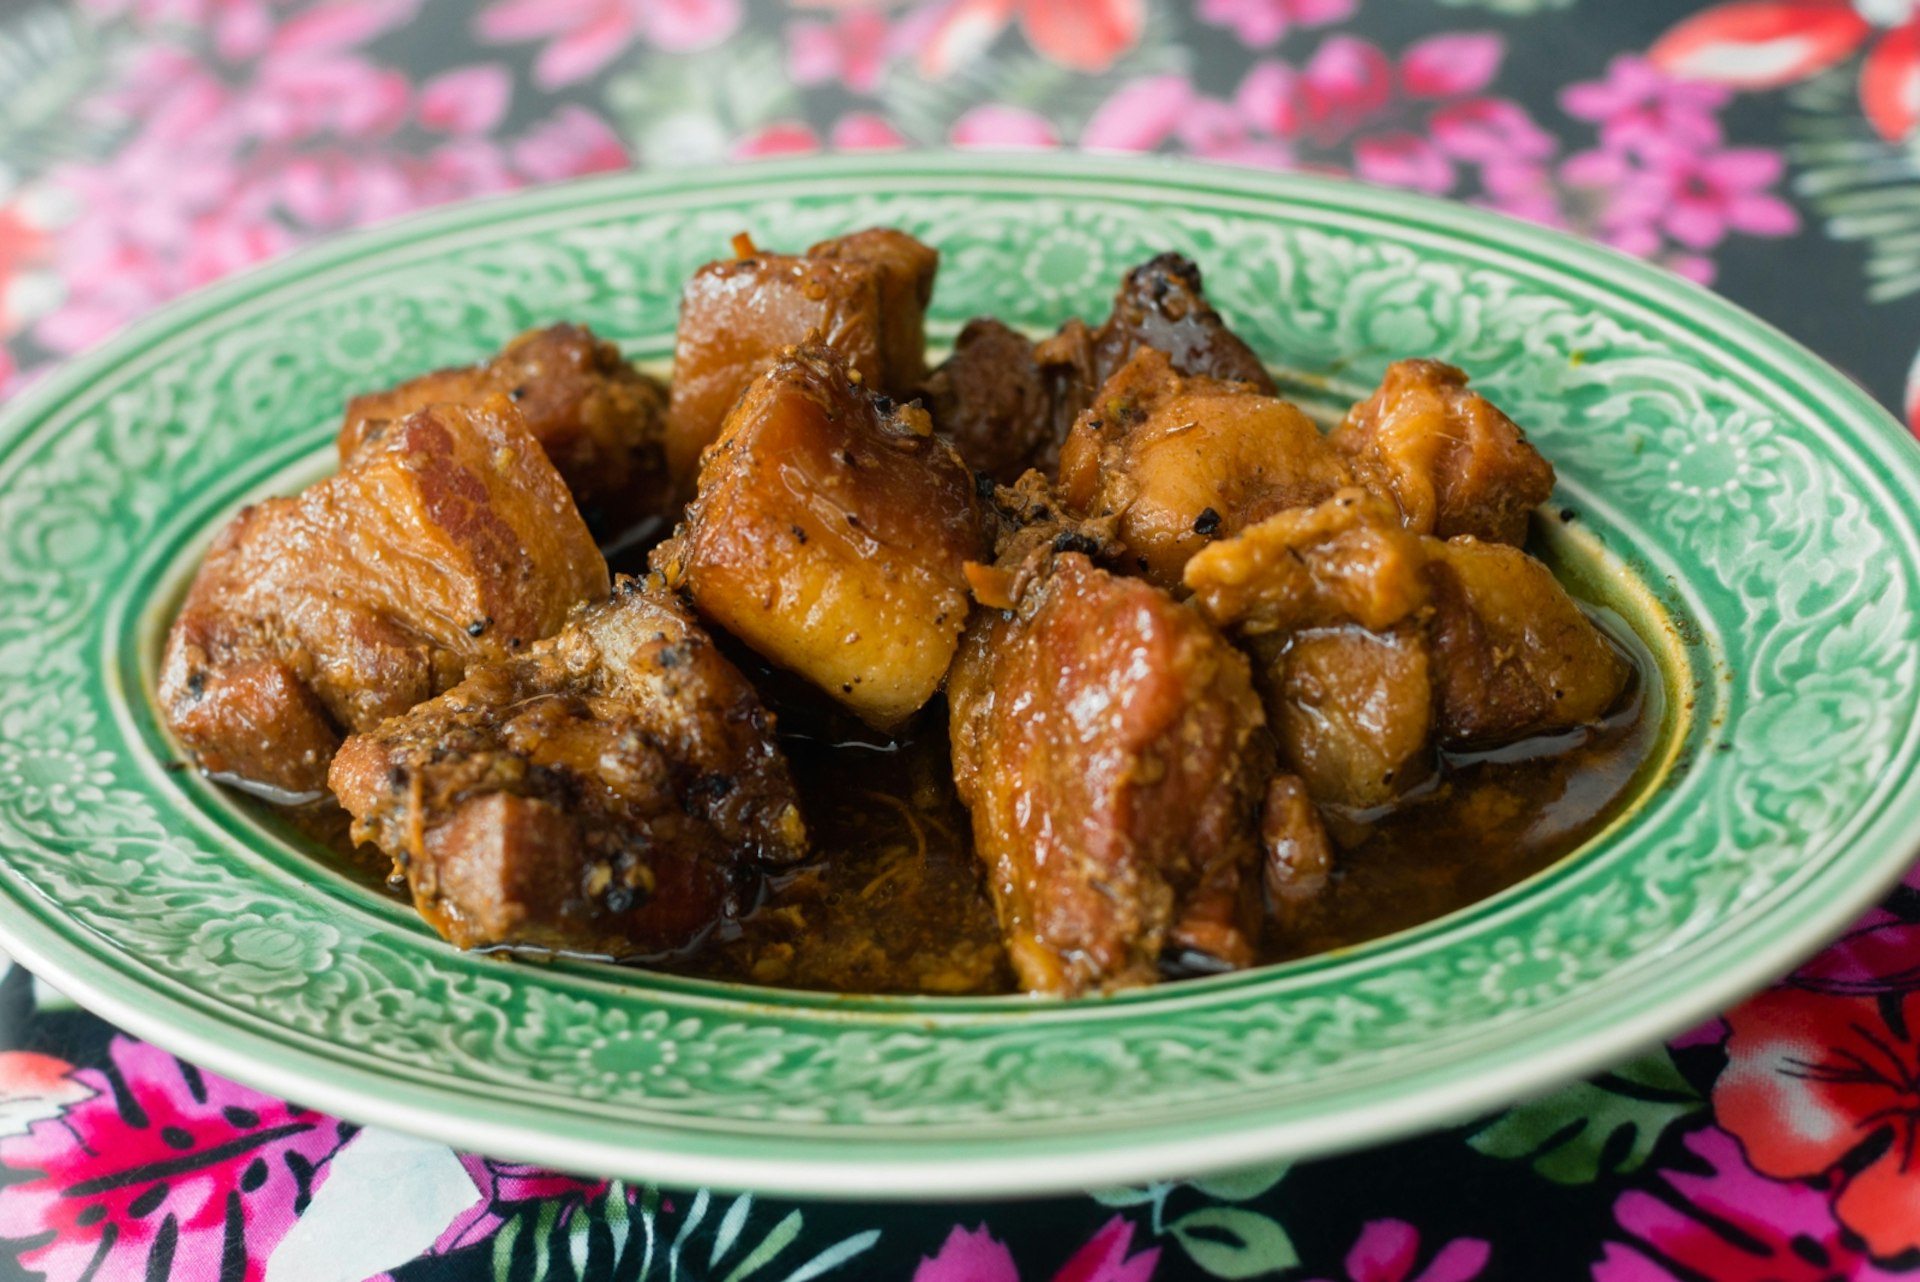 Moo hong is a sweet pork dish with both Chinese and local influences © Austin Bush / Lonely Planet